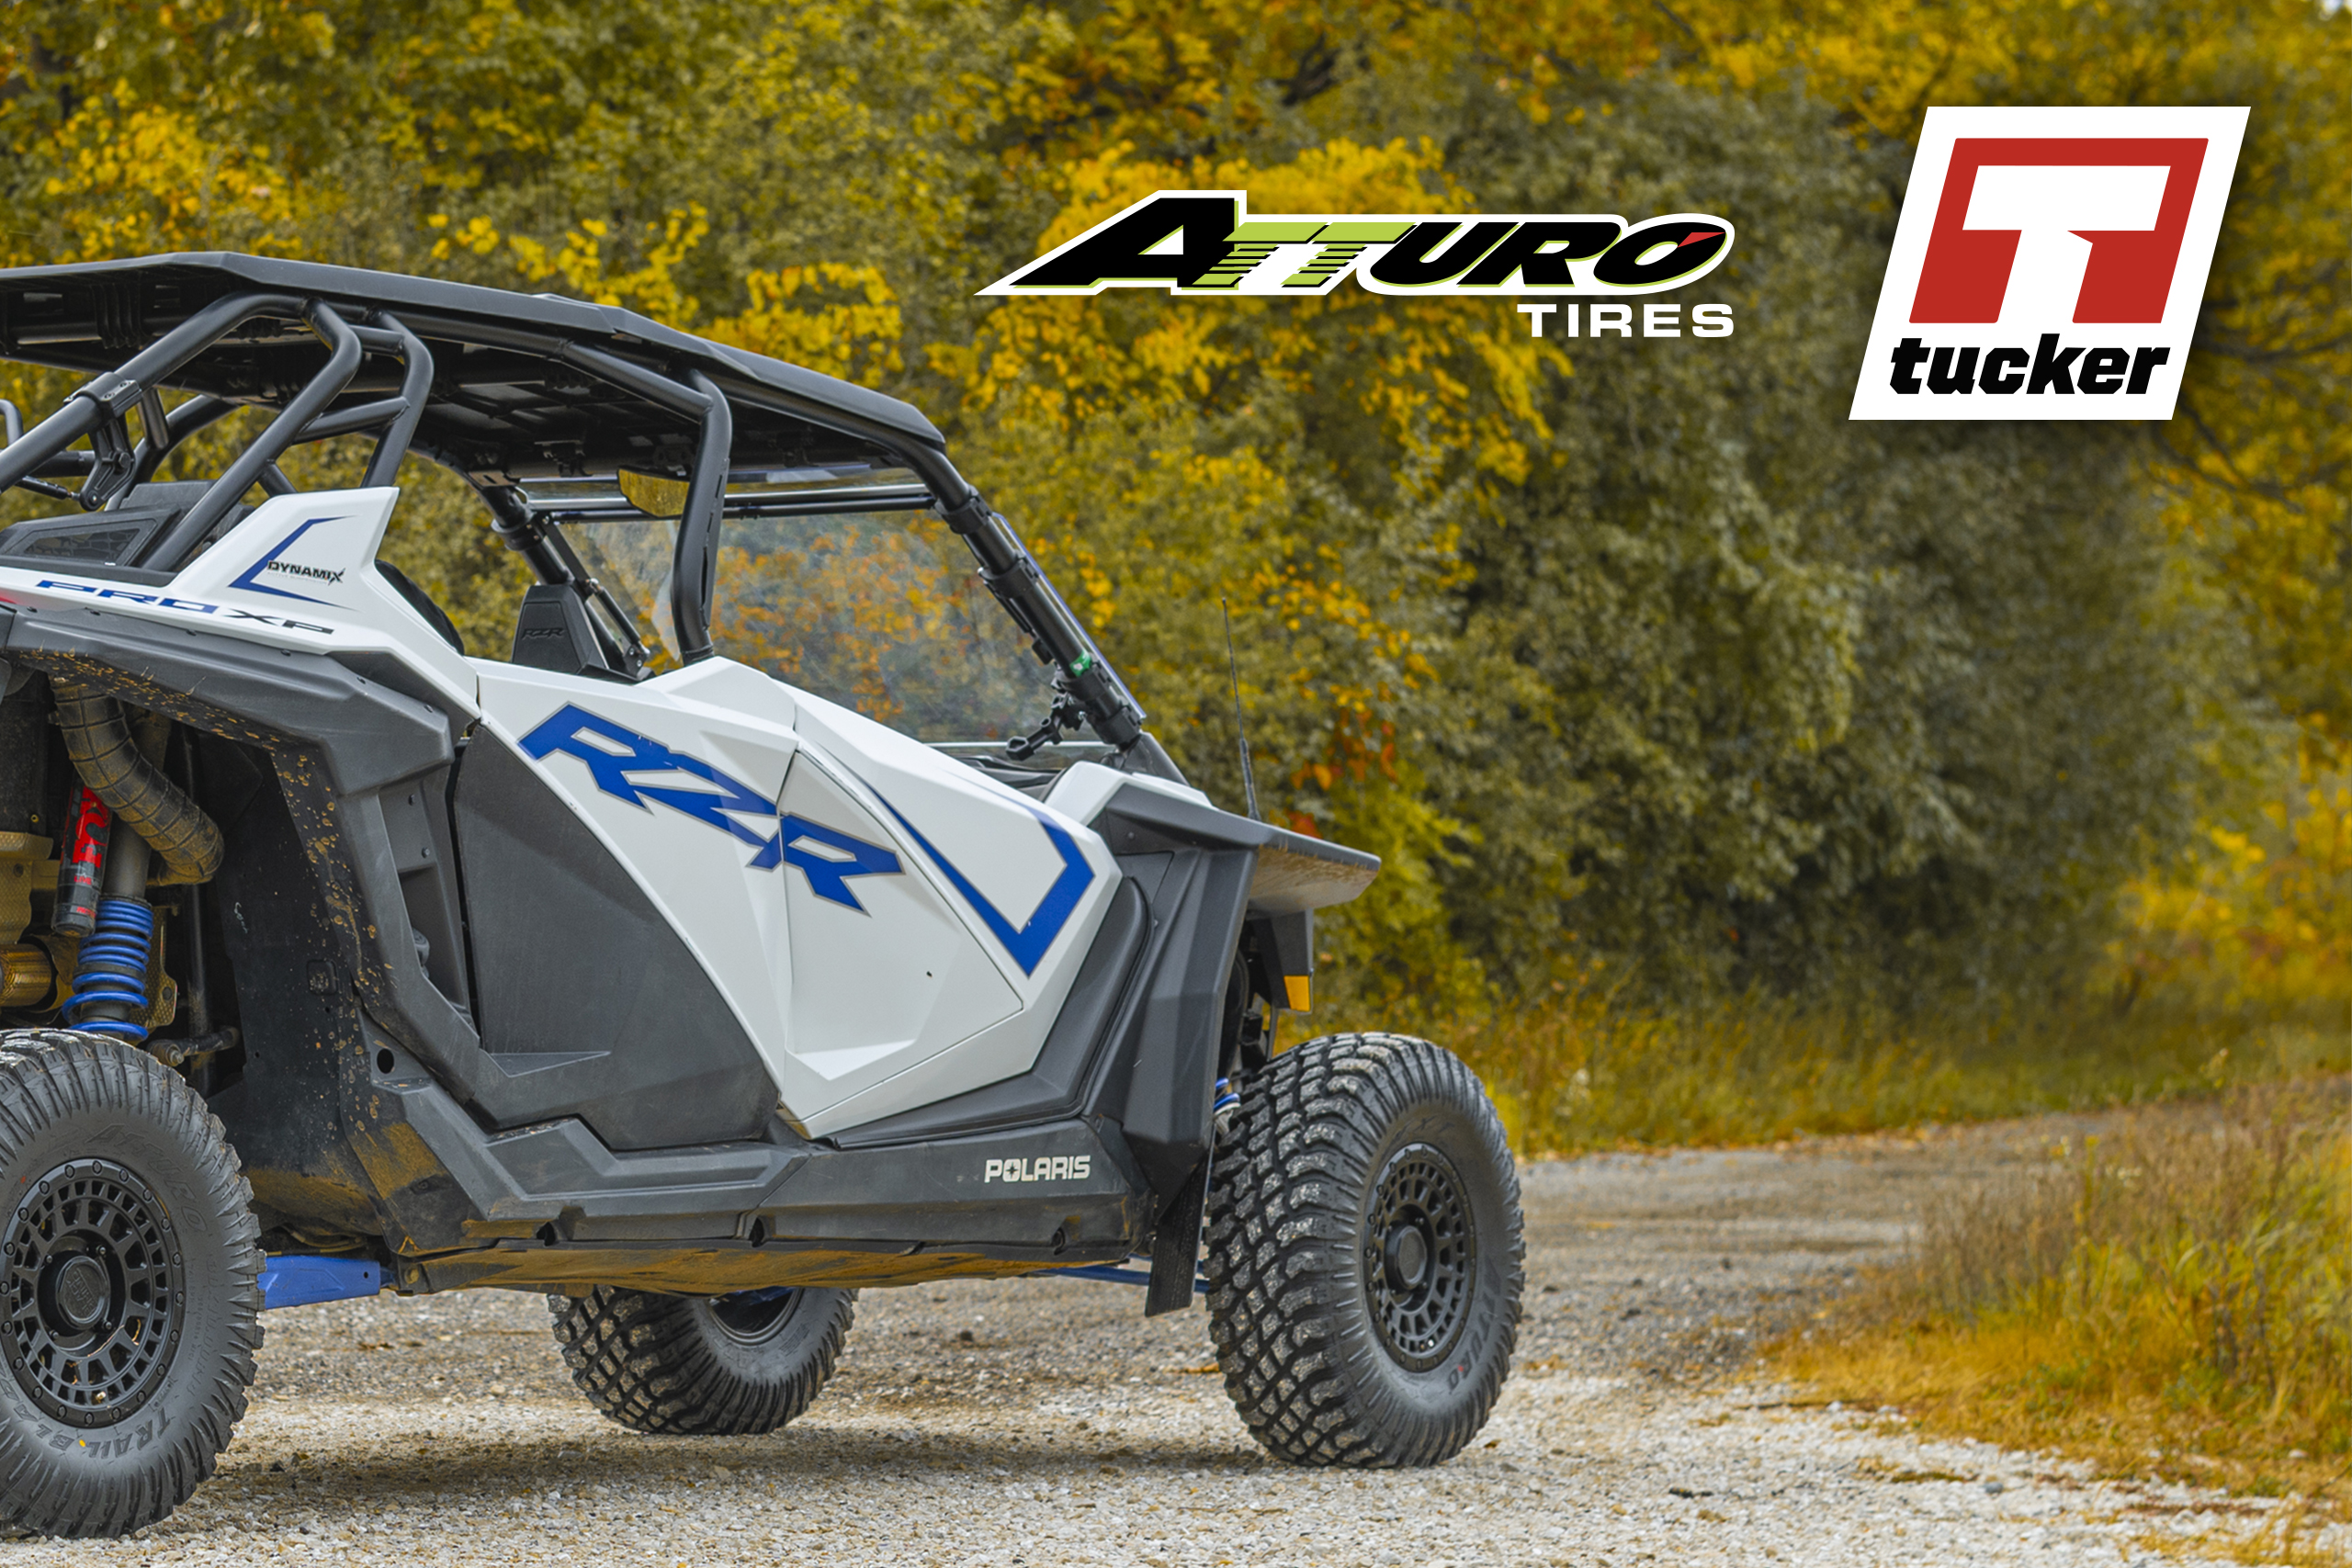 TUCKER POWERSPORTS INKS PARTNERSHIP WITH ATTURO TIRE FOR NEW TRAIL BLADE SXS TIRE DISTRIBUTION